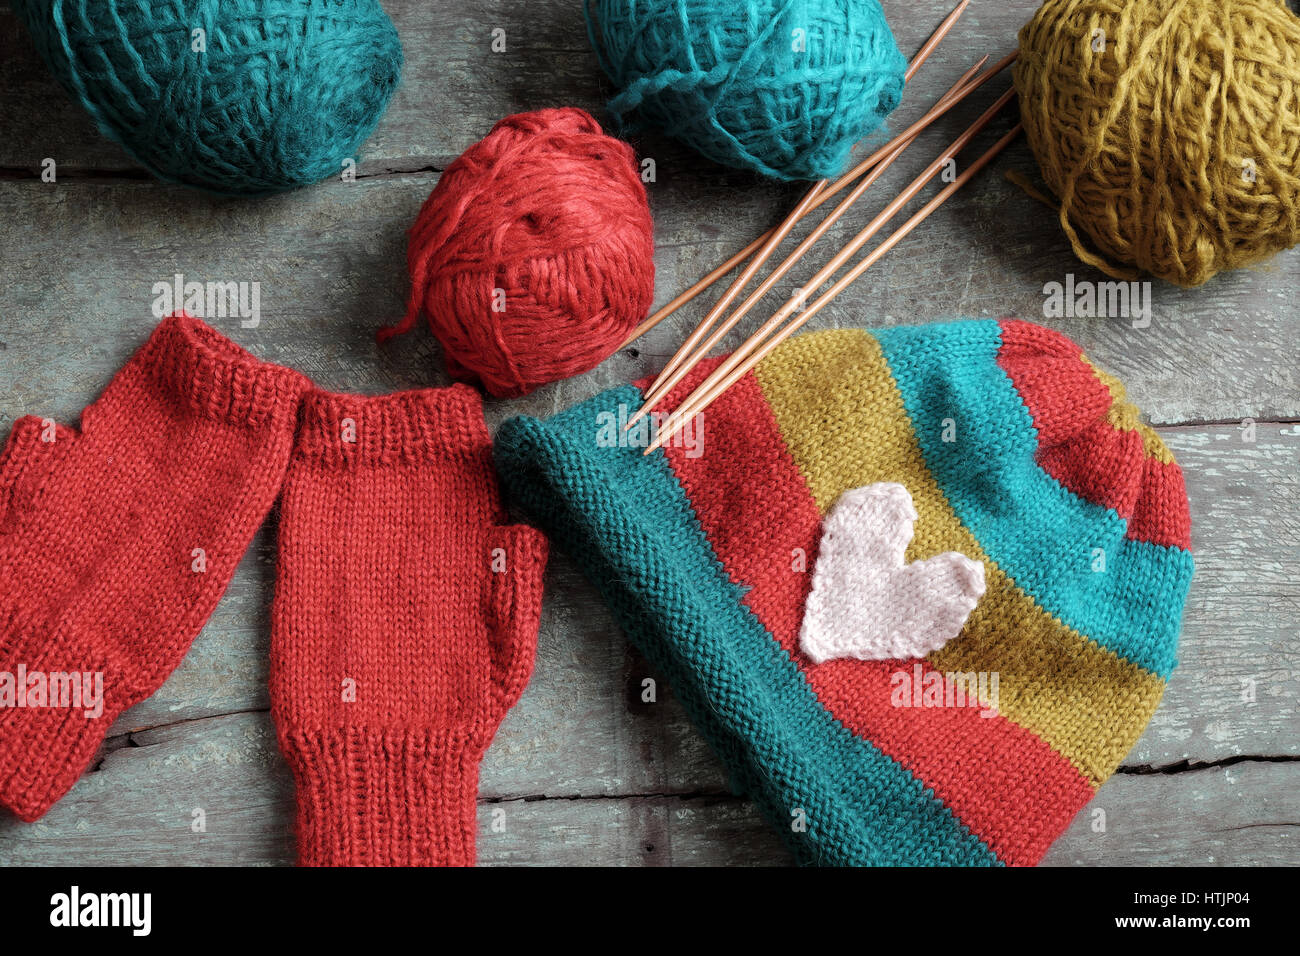 Handmade gift for winter, knitted gloves and knit hat for cold day, group of colorful yarn make warm, knit accessories is hobby activity of woman Stock Photo